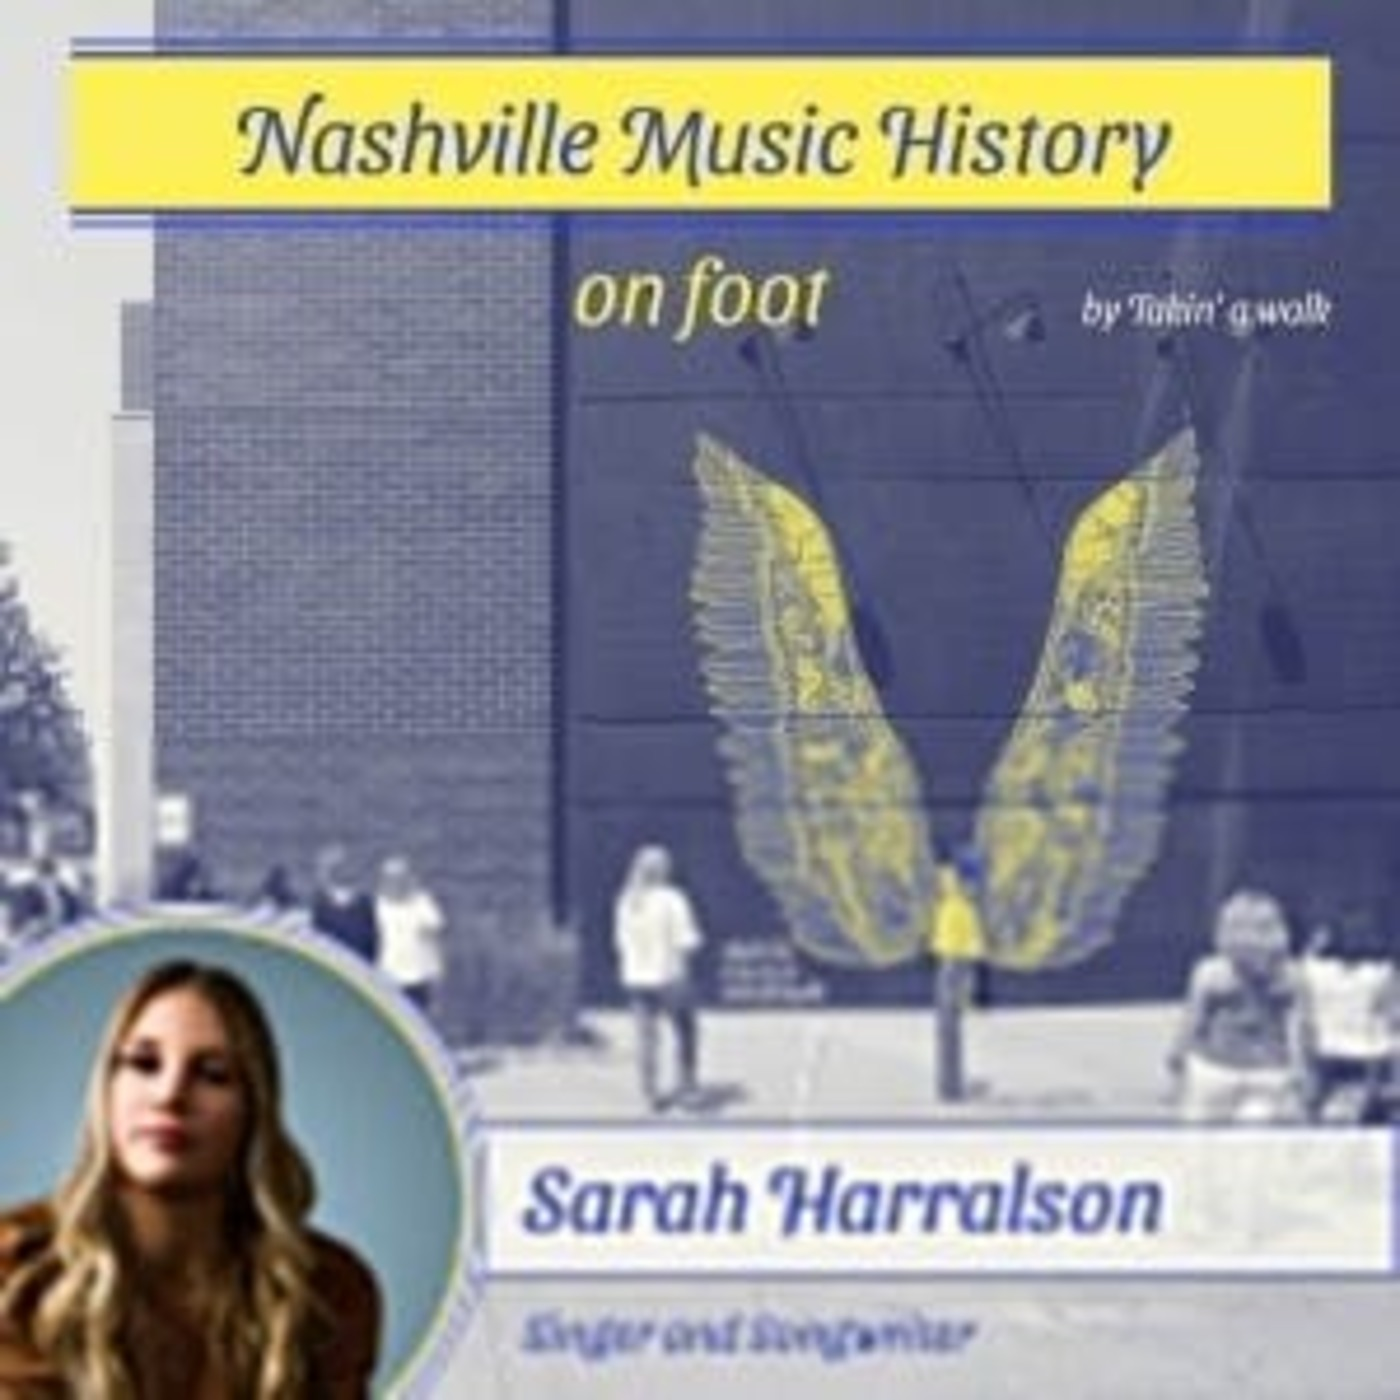 Takin A Walk to The Ryman Auditorium with Nashville Singer/Songwriter Sarah Harralson: Step by Step building a future.